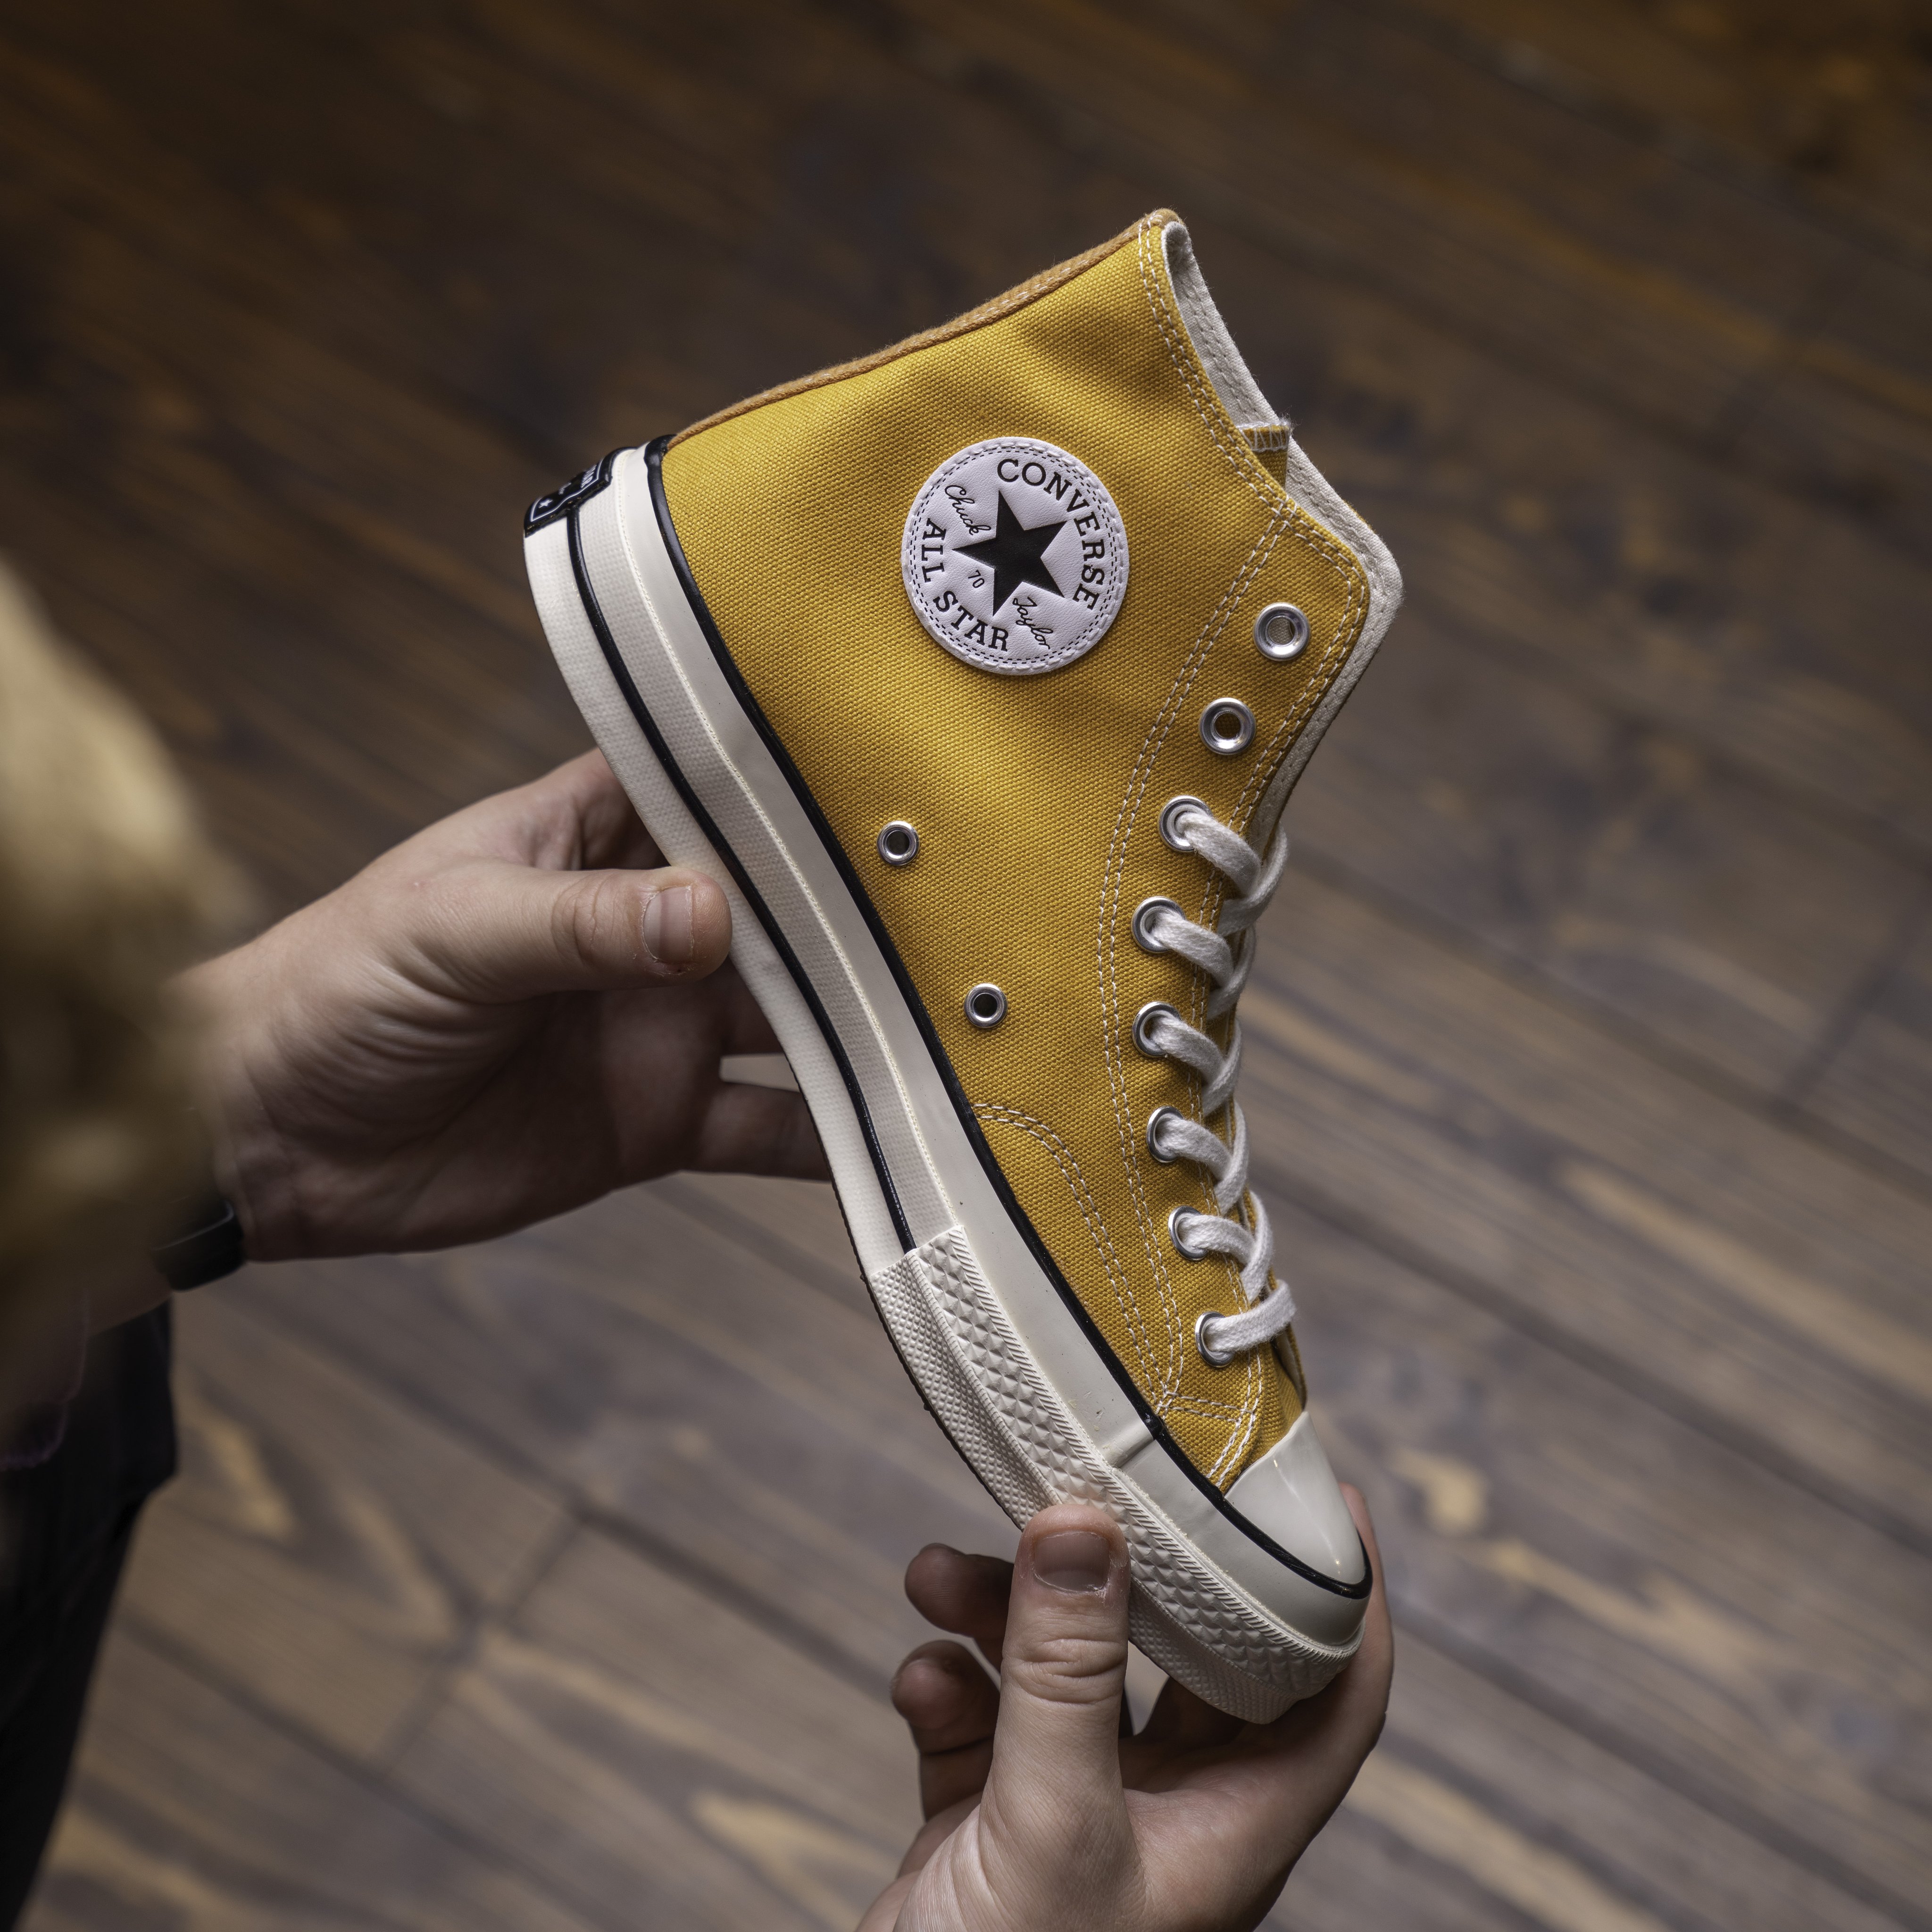 Ansichtkaart Moment Geest size? on Twitter: "The @CONVERSE Chuck Taylor All Star 70's High is now  only £40 in the size? sale. What more reason do you need? Shop now at:  https://t.co/bMDqDrSZTl https://t.co/4F3soUEacS" / Twitter